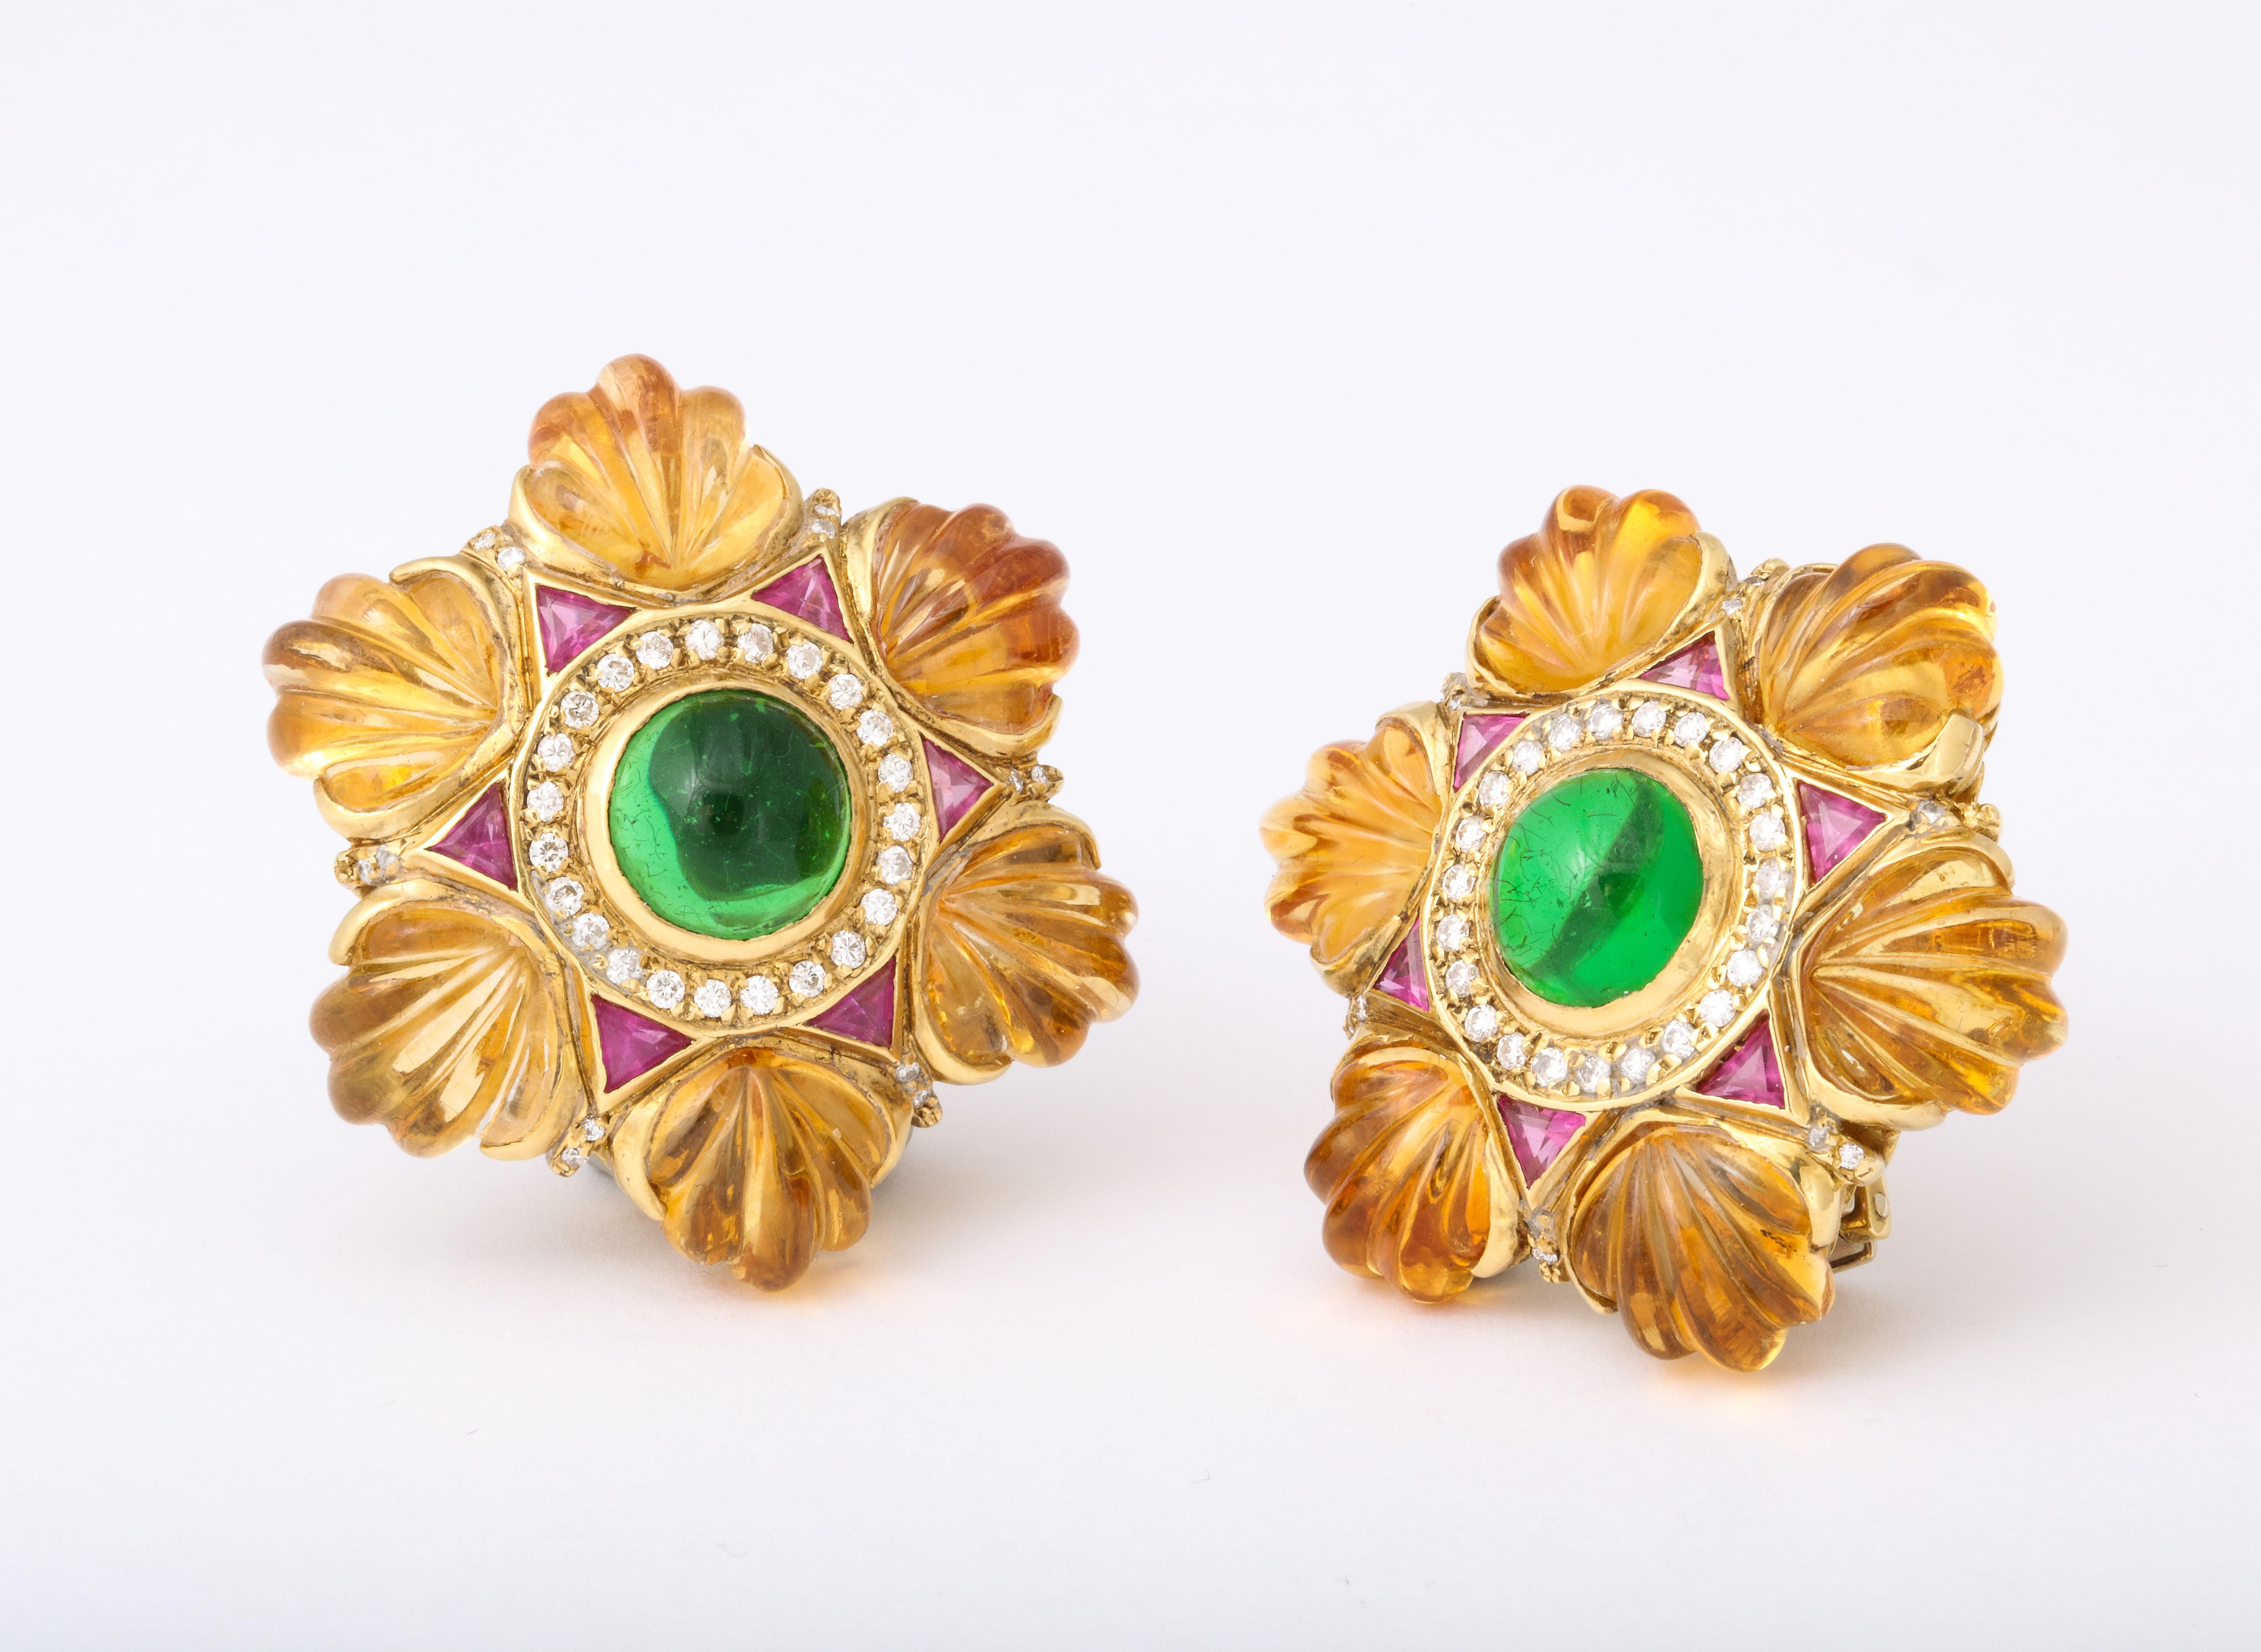 We offer this rich color combination of gem stones in 18K gold ear clips set with large green tourmaline cabochons surrounded by diamonds and triangular cut rubies trimmed with carved shell forms of golden citrine. A post is present but easily